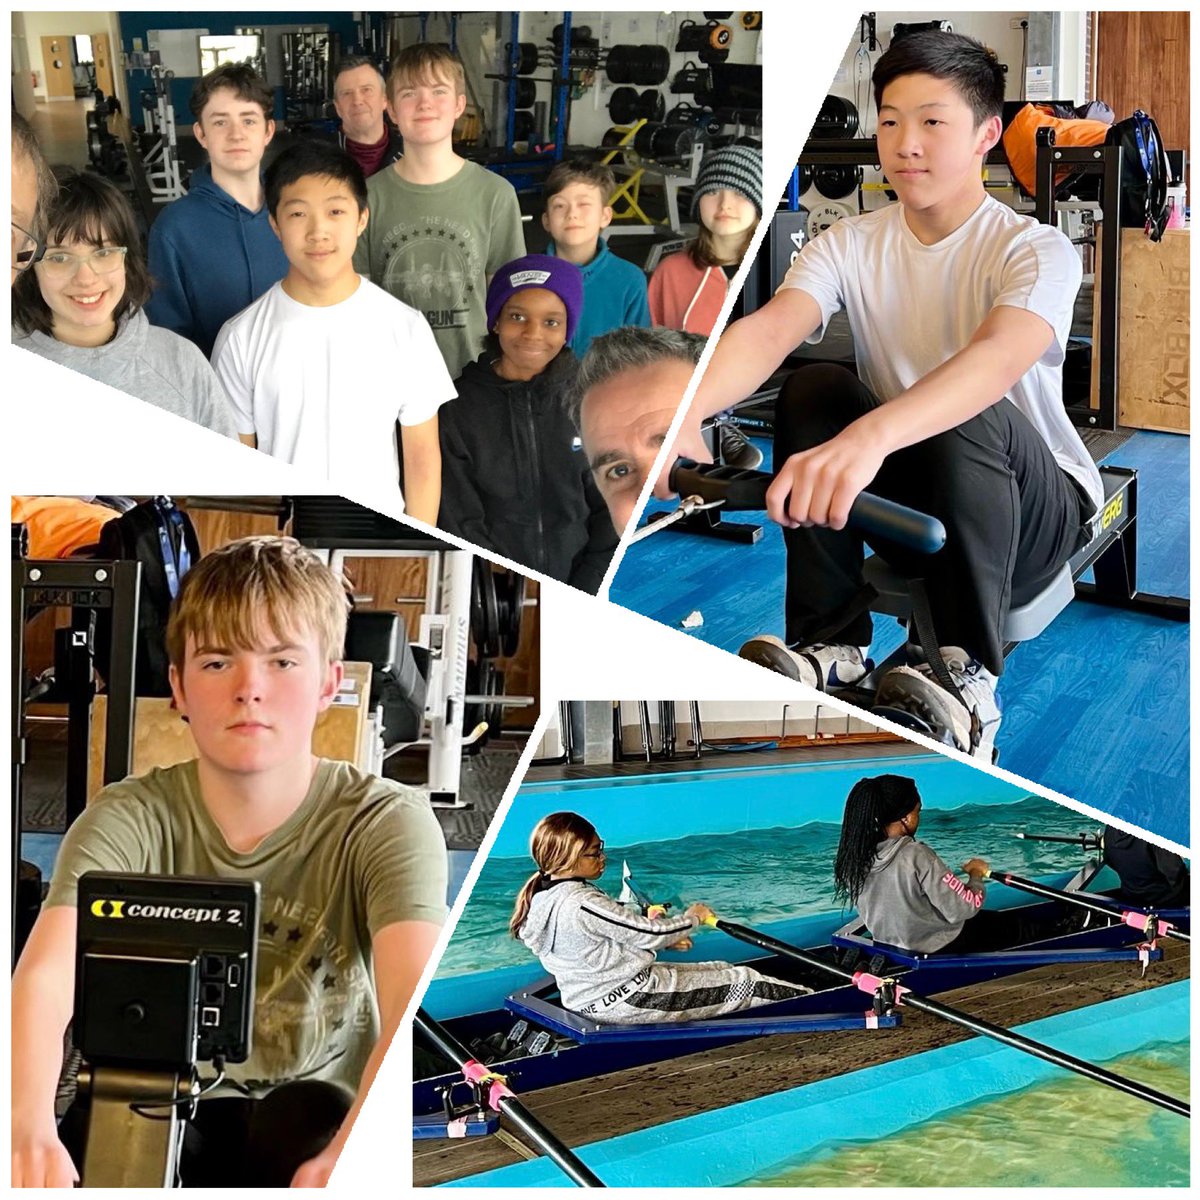 Too windy to be on the water today so our @OLHSMotherwell crew worked on their skills and fitness in the @ScottishRowing Centre. Impressive technical progress, some amazing scores on the rowing machine and great relay racing to end the session @NLActiveSchools @SP_RC1 @active_nl